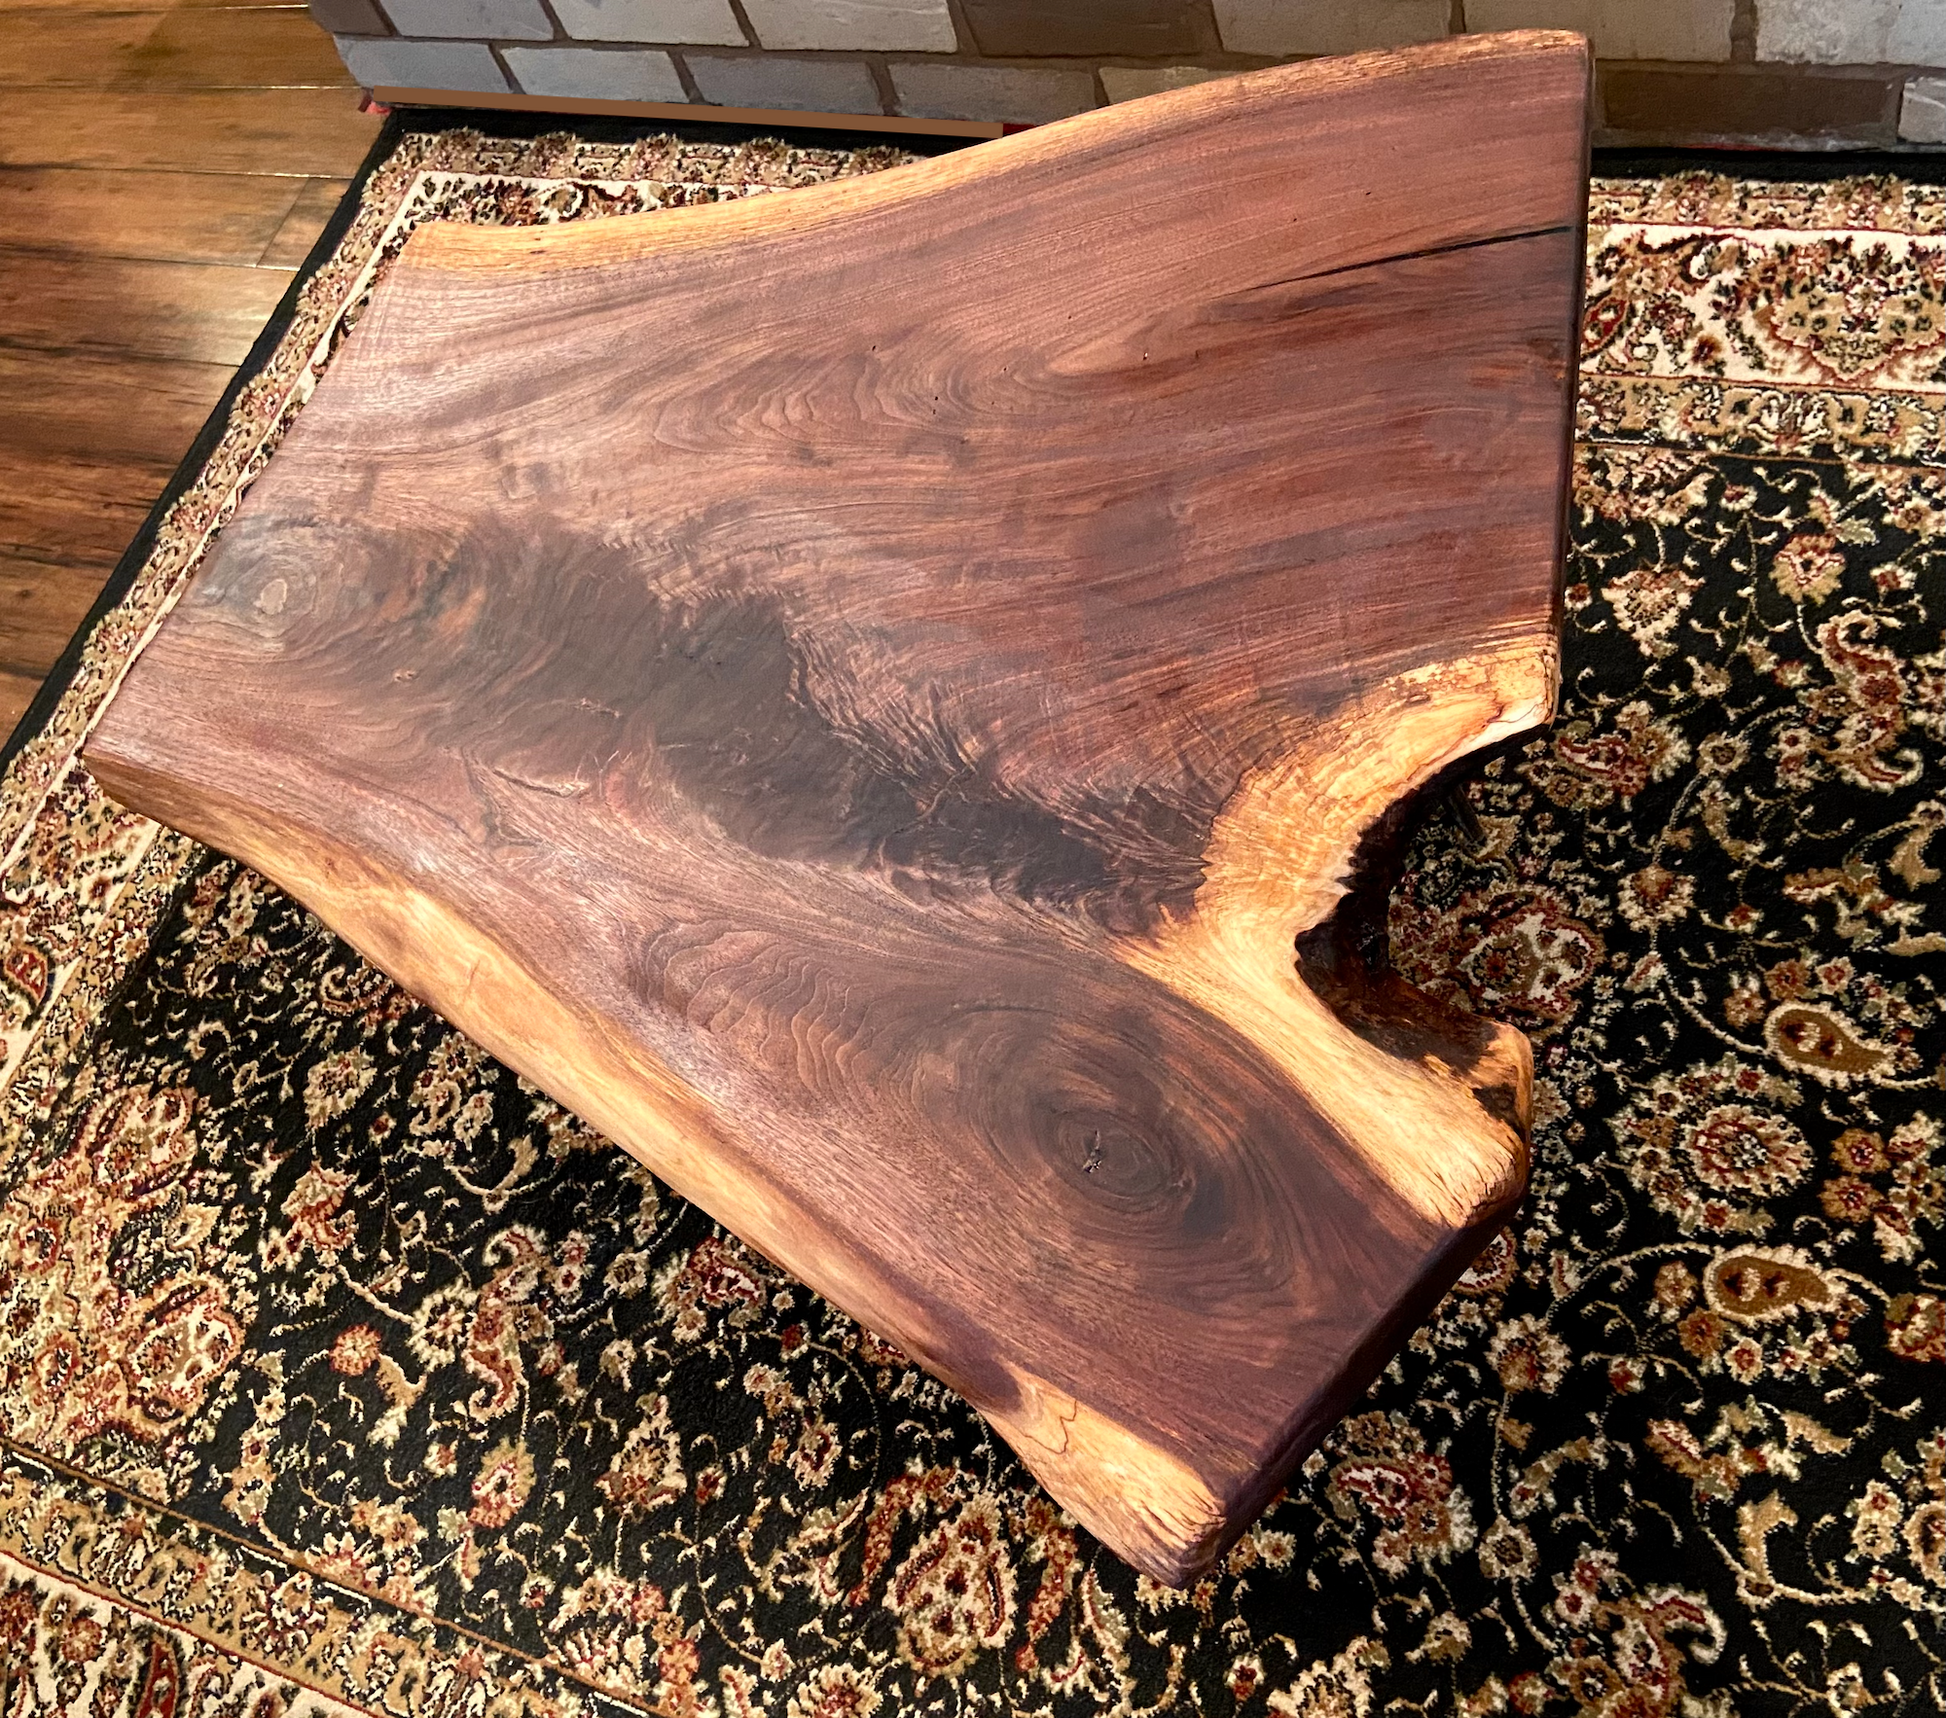 Wide Forked Live Edge Walnut Table|Stunning Live Edge Wood Coffee Table|Natural Edge Black Walnut Table|Live Edge Wood Rustic Walnut Table